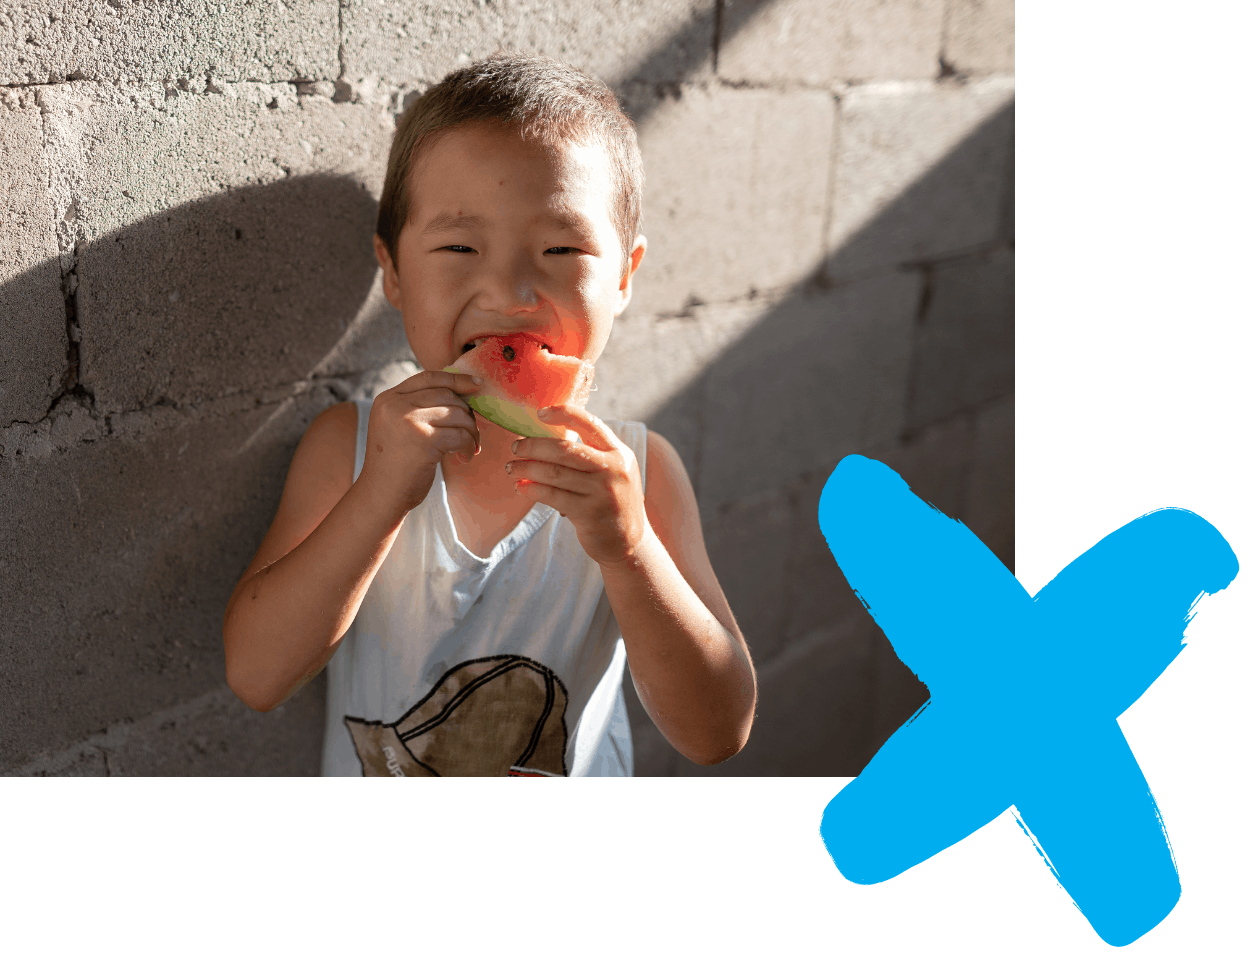 UNICEF Aotearoa nutrition - Young smiling child eating watermelon